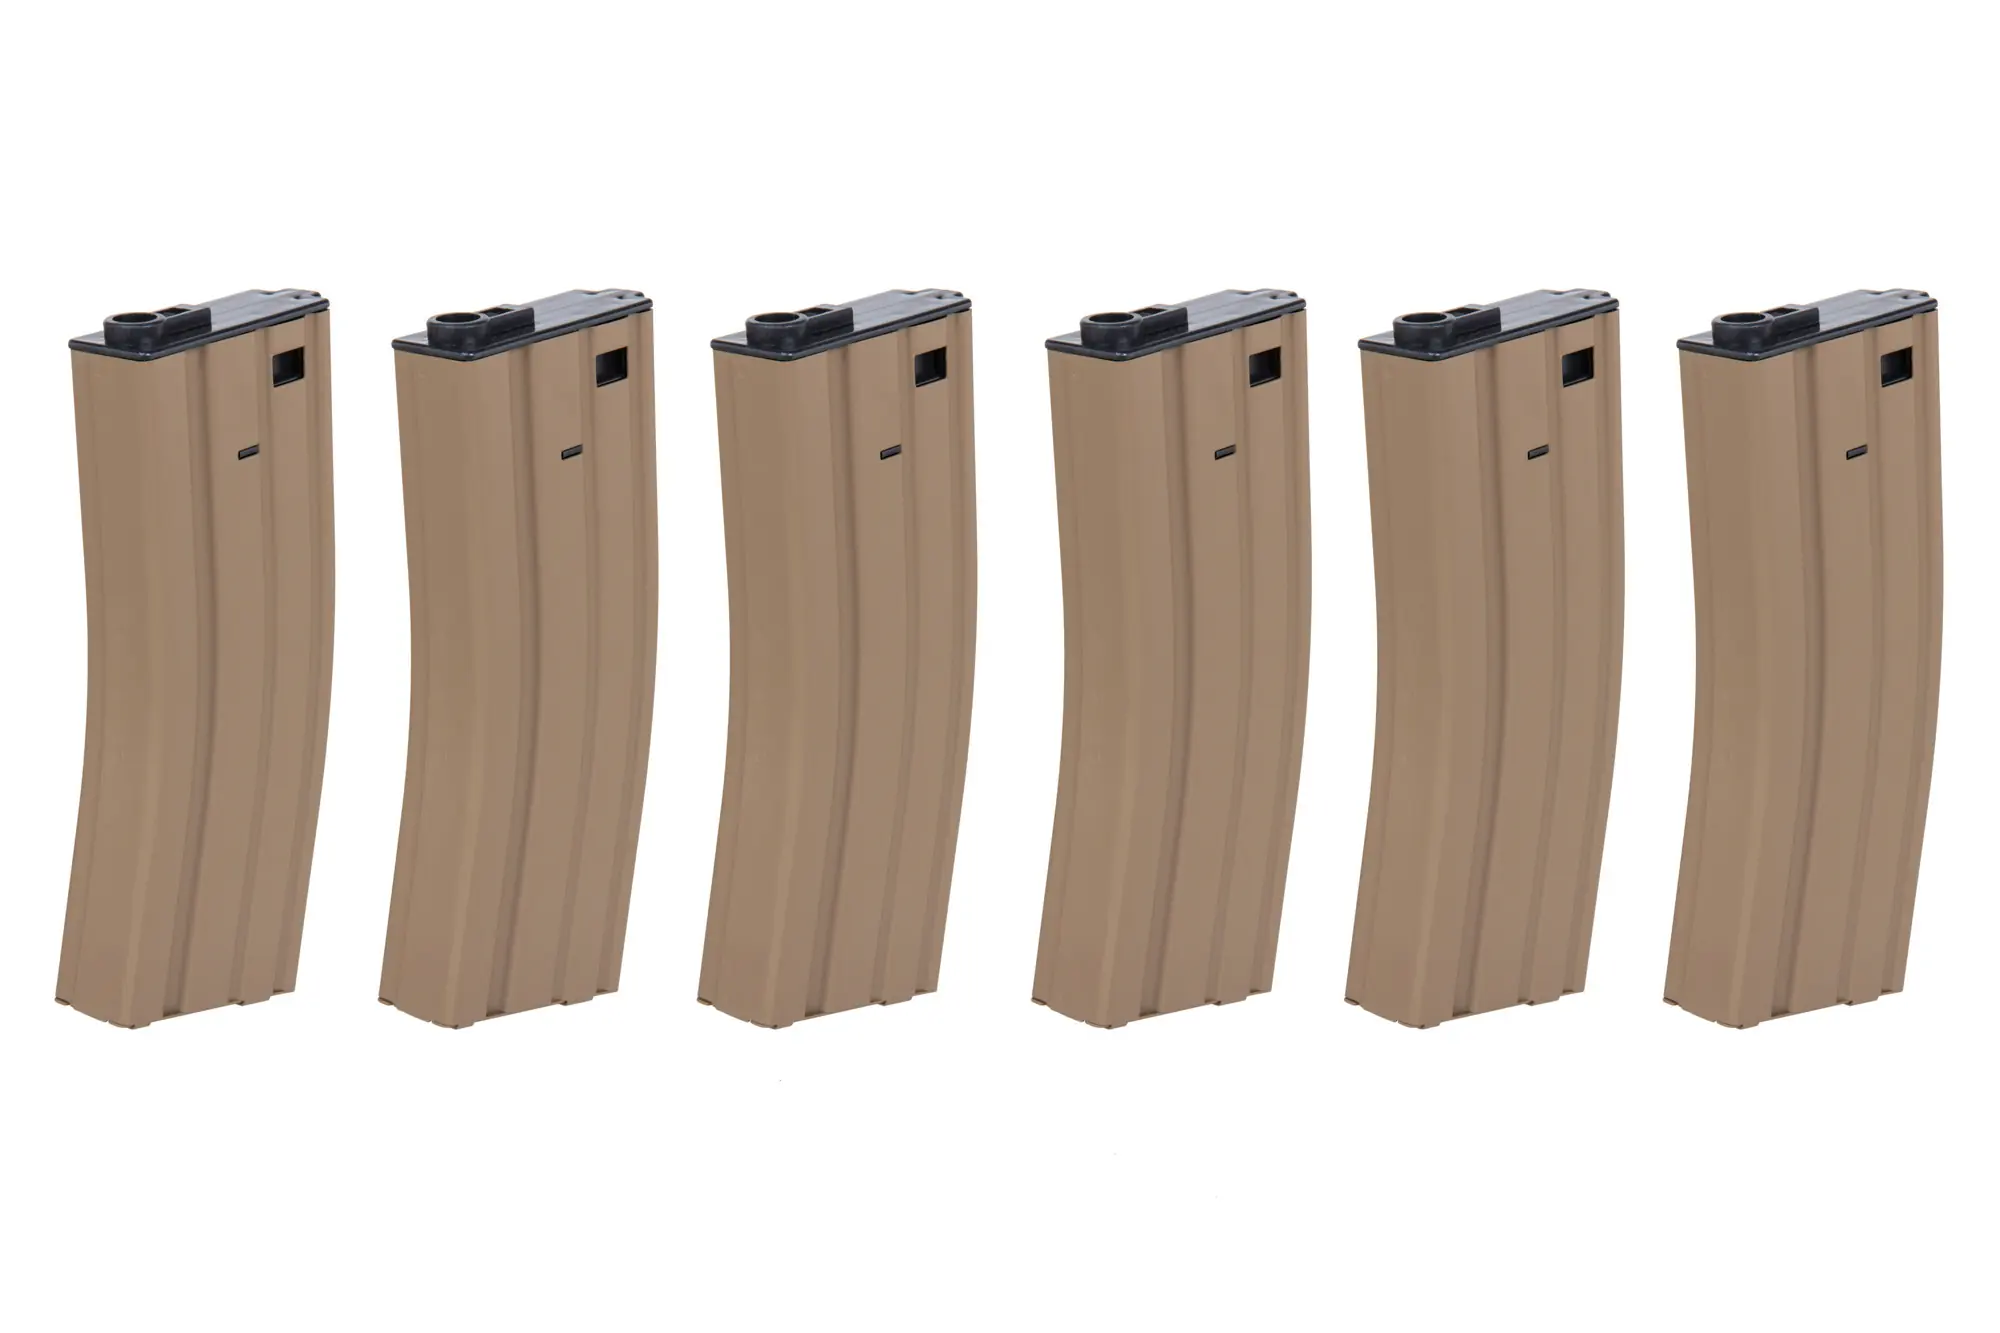 Set of 6 SRC Low-Cap magazines for M4 replicas for 70 rounds TAN